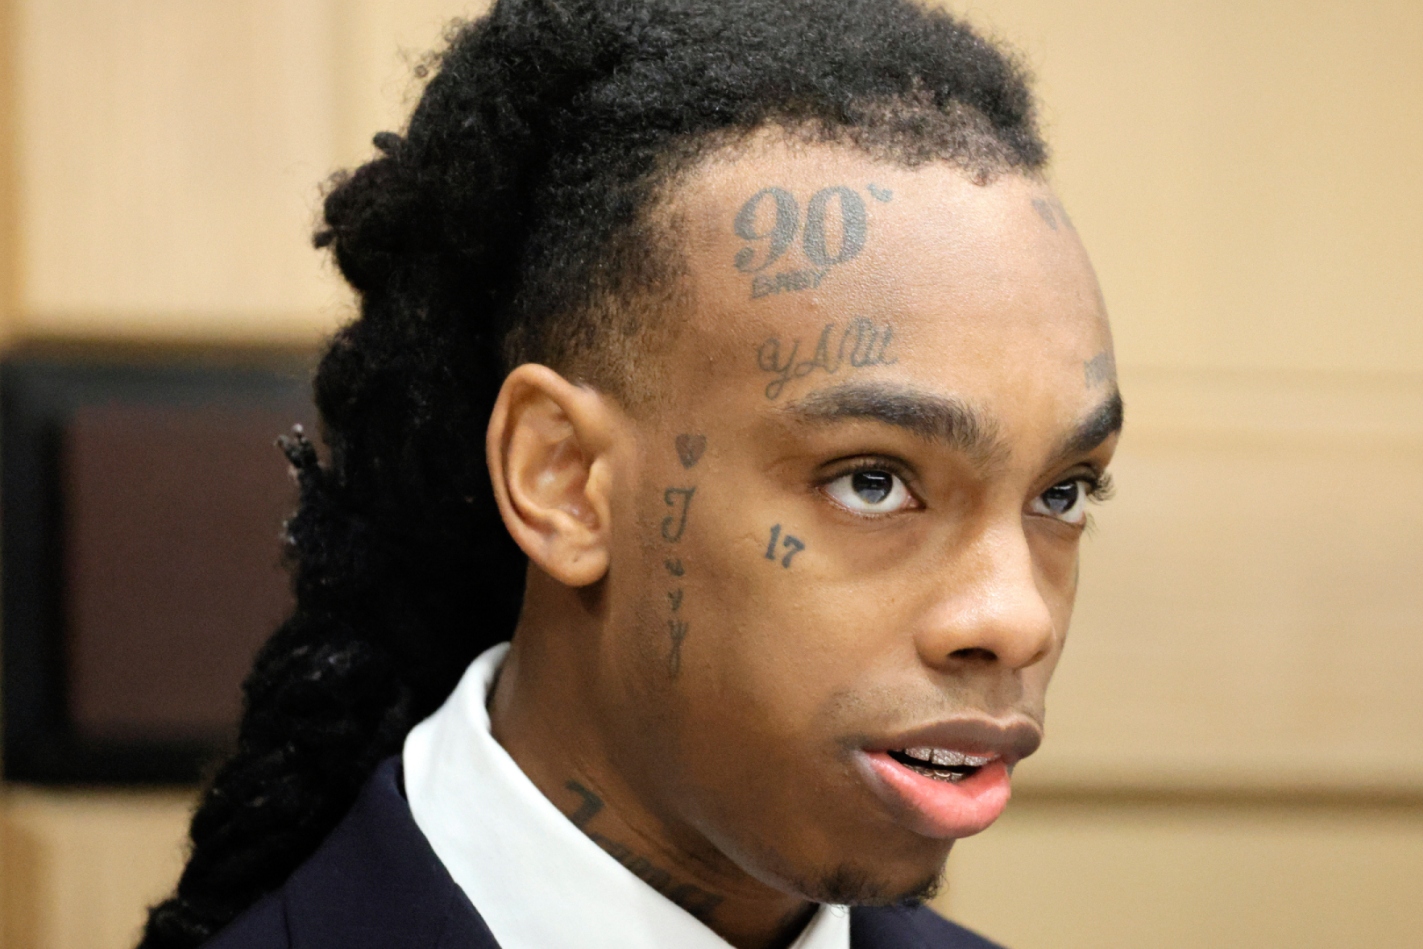 YNW Melly Stuck In Waiting Game; Victim’s Mom Urges Judge To Deny Bond #YNWMelly